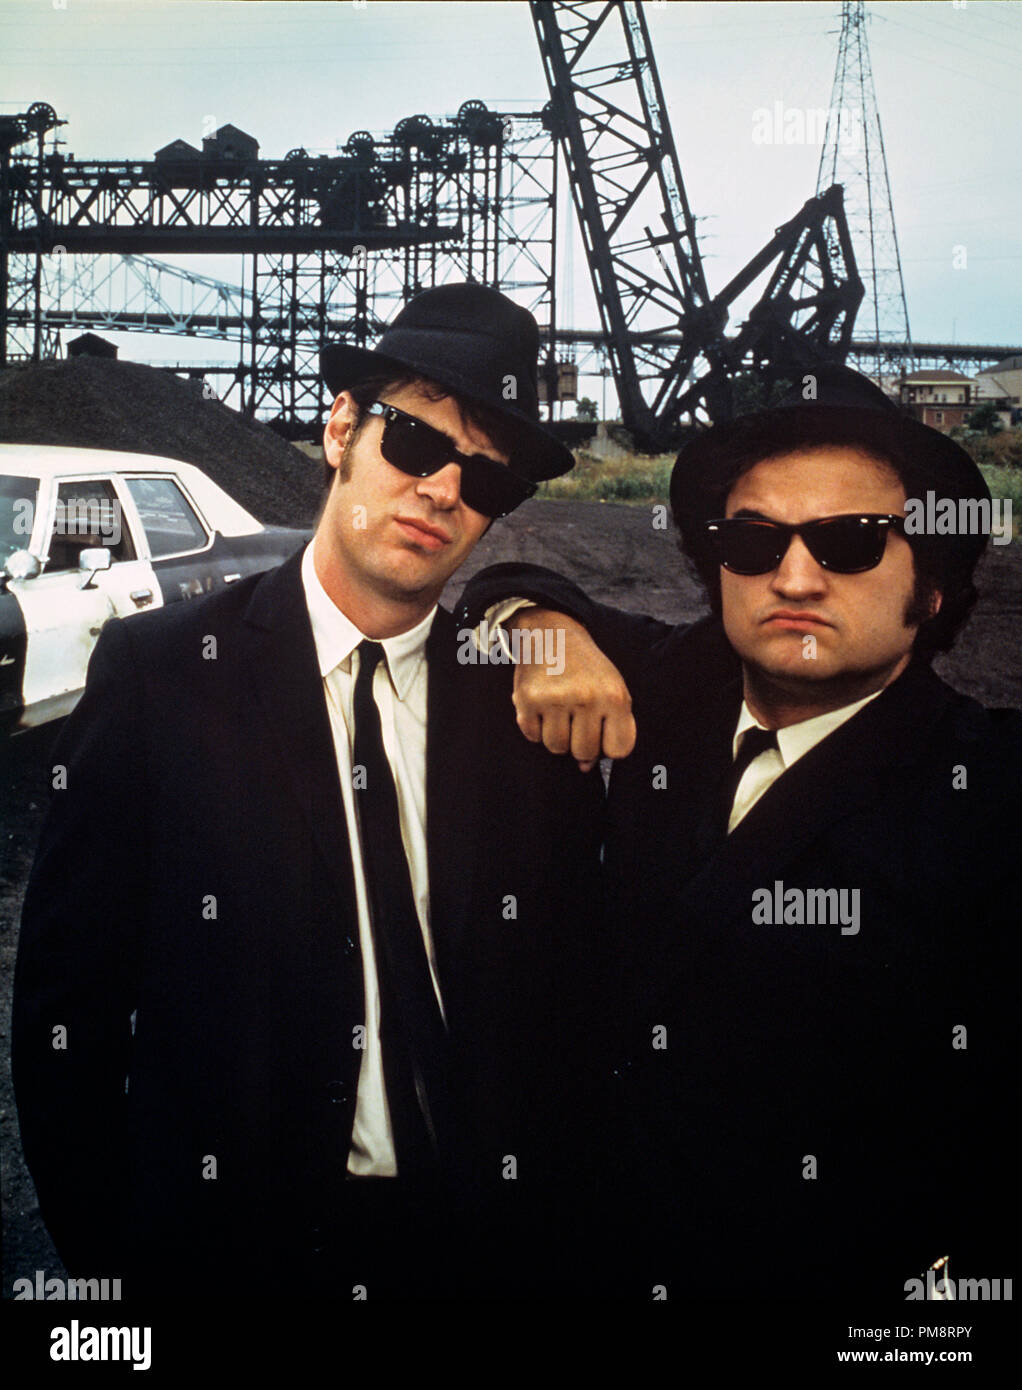 Studio Publicity Still from "The Blues Brothers" Dan Aykroyd, John Belushi © 1980 Universal   All Rights Reserved   File Reference # 31715070THA  For Editorial Use Only Stock Photo